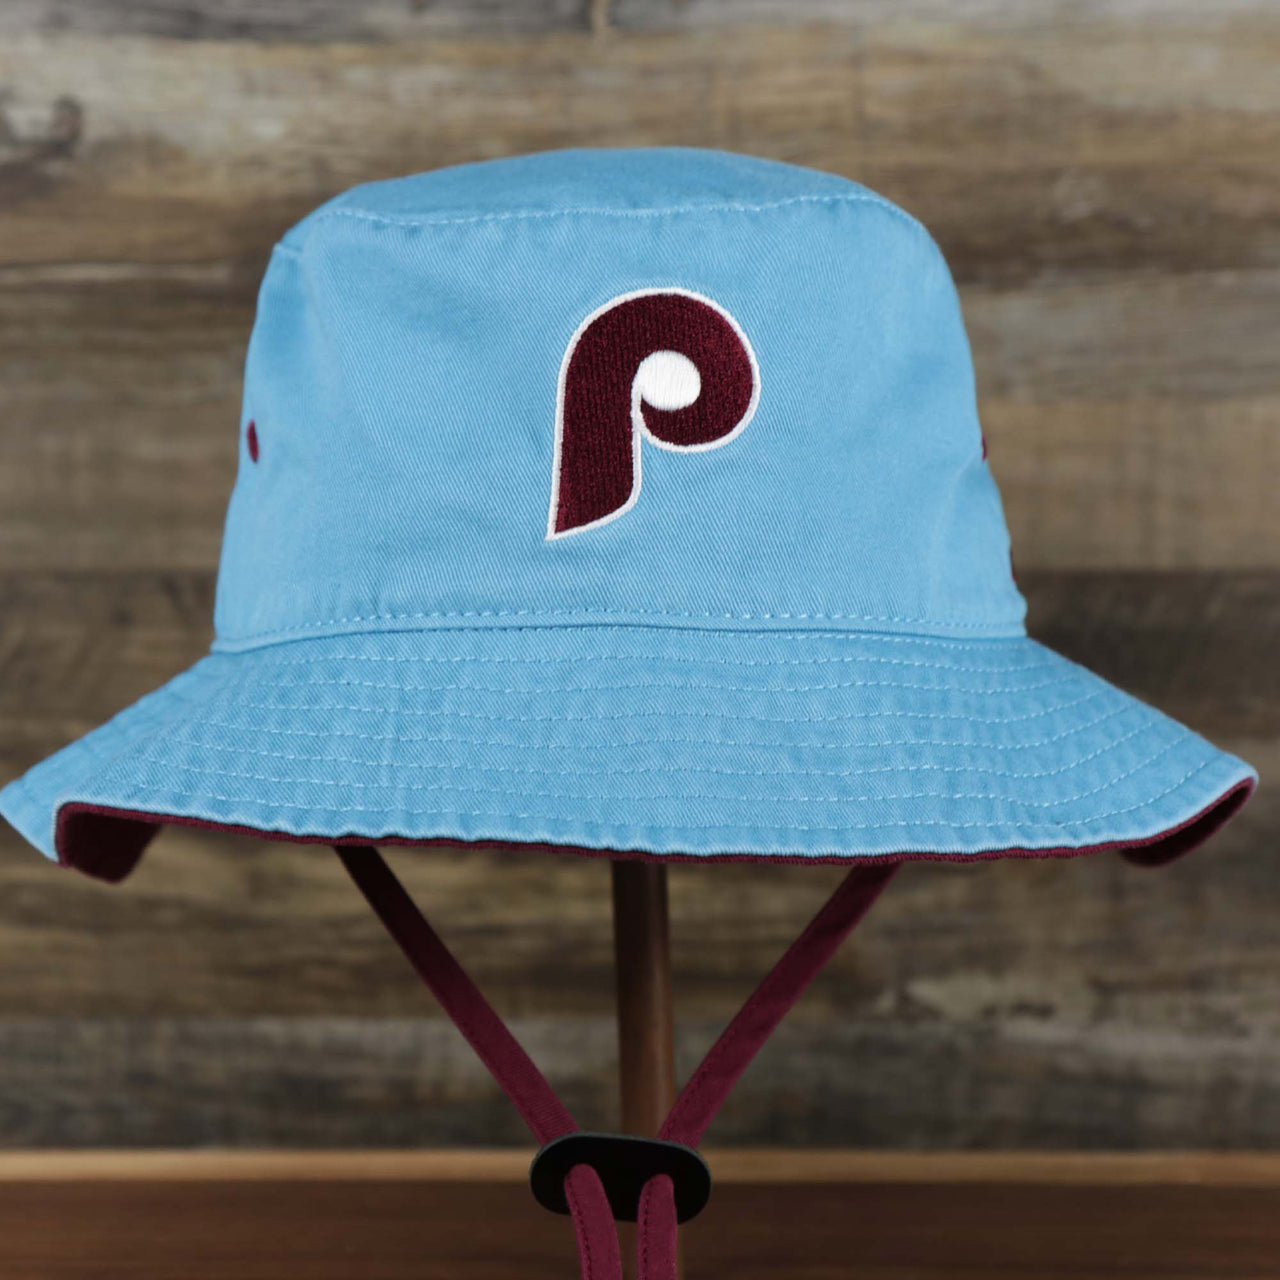 The front of the Cooperstown Philadelphia Phillies Vintage 80s Bucket Hat | 47 Brand, Light Blue